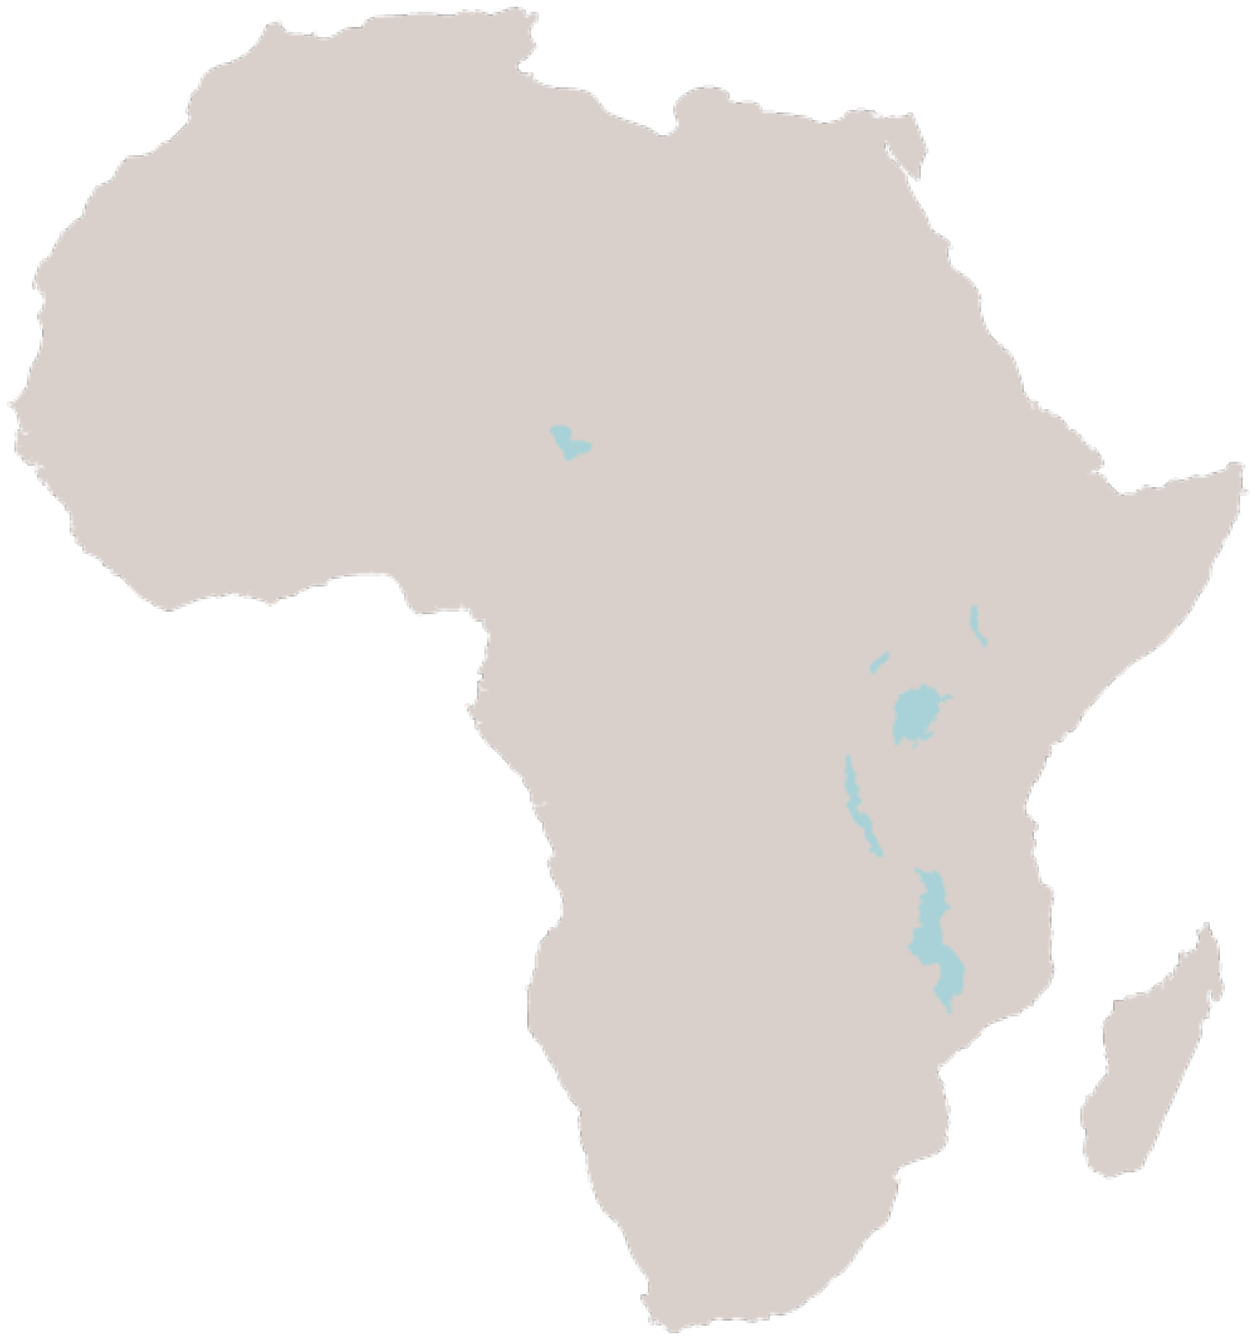 Map of Africa Transparent File